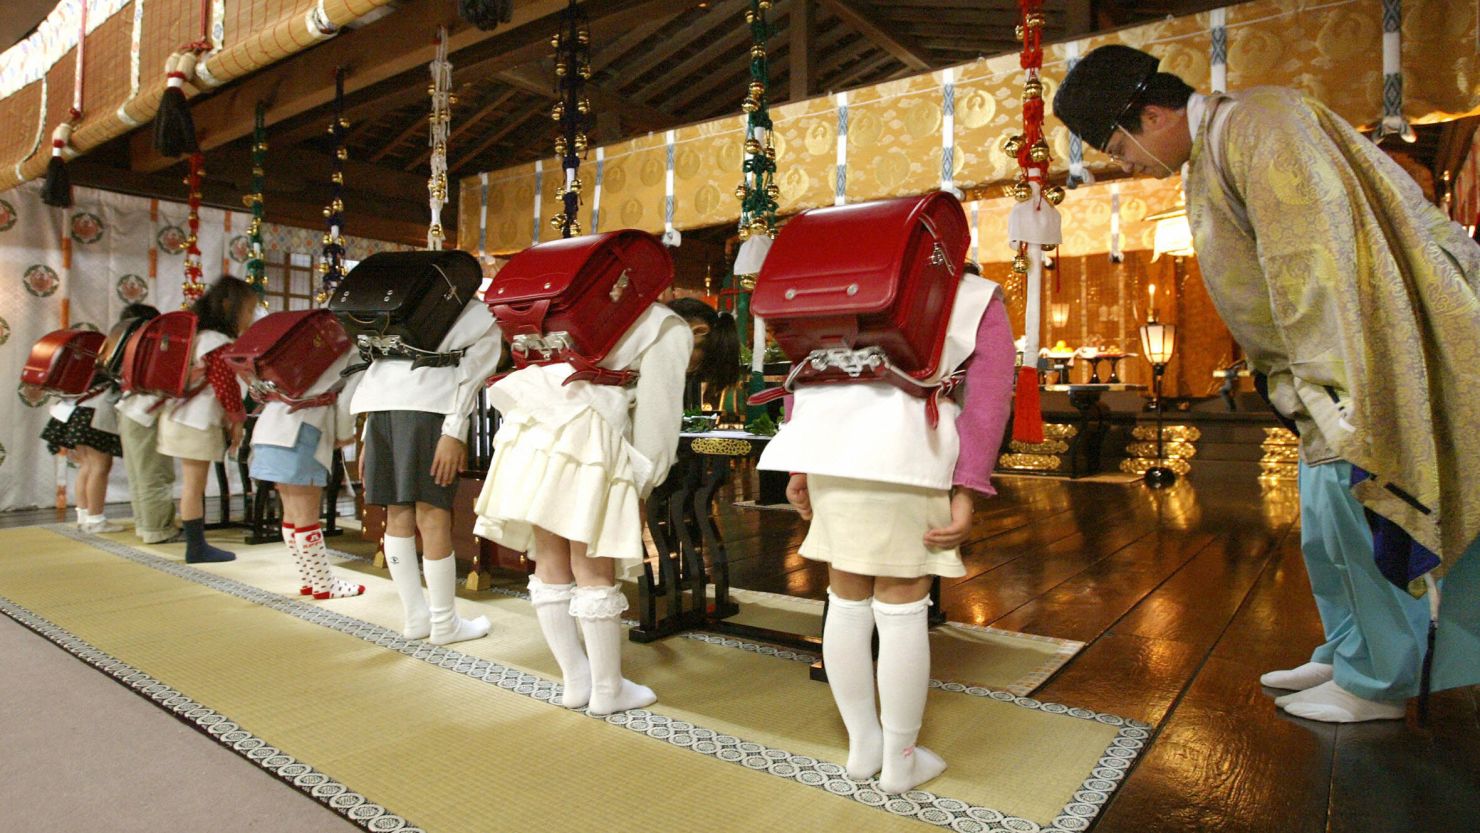 The traditional satchel (randoseru in Japanese) is a mandatory item for first year elementary school kids. The students and their schoolbags are purified at a ceremony at a Shinto shrine to pray for safety.